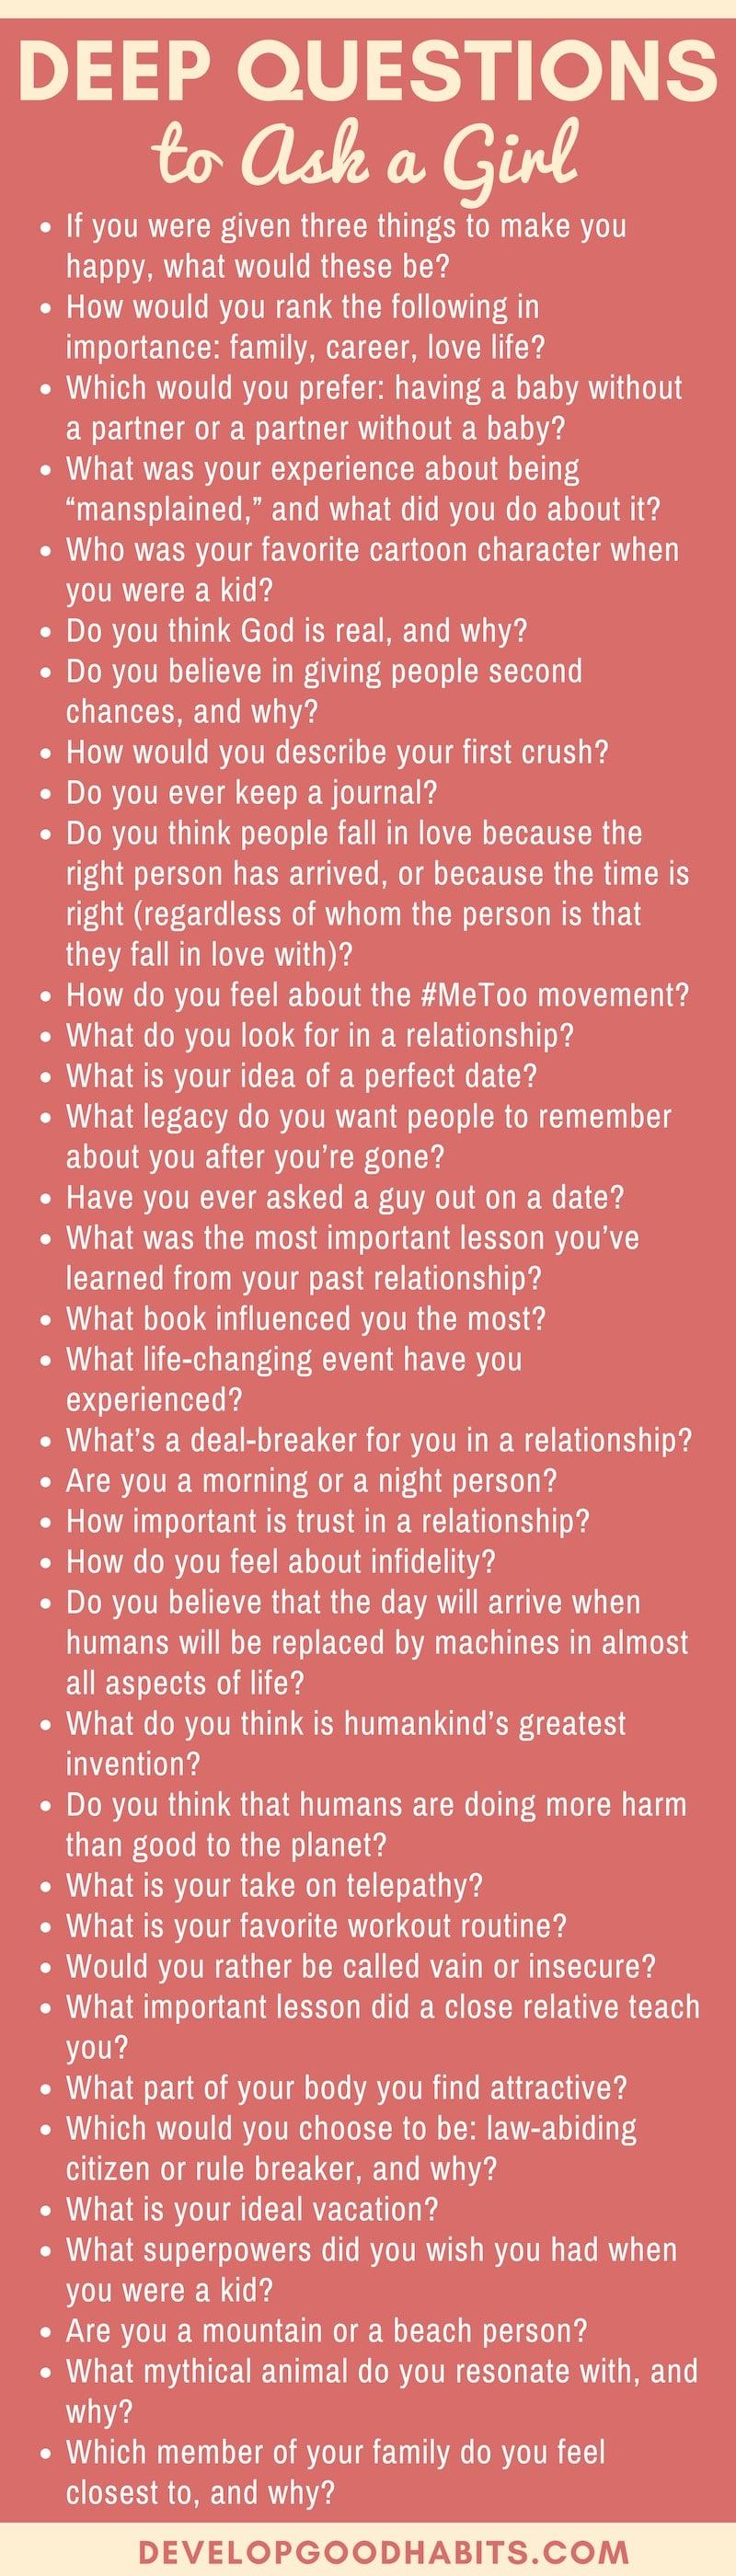 Questions to ask girls about sex